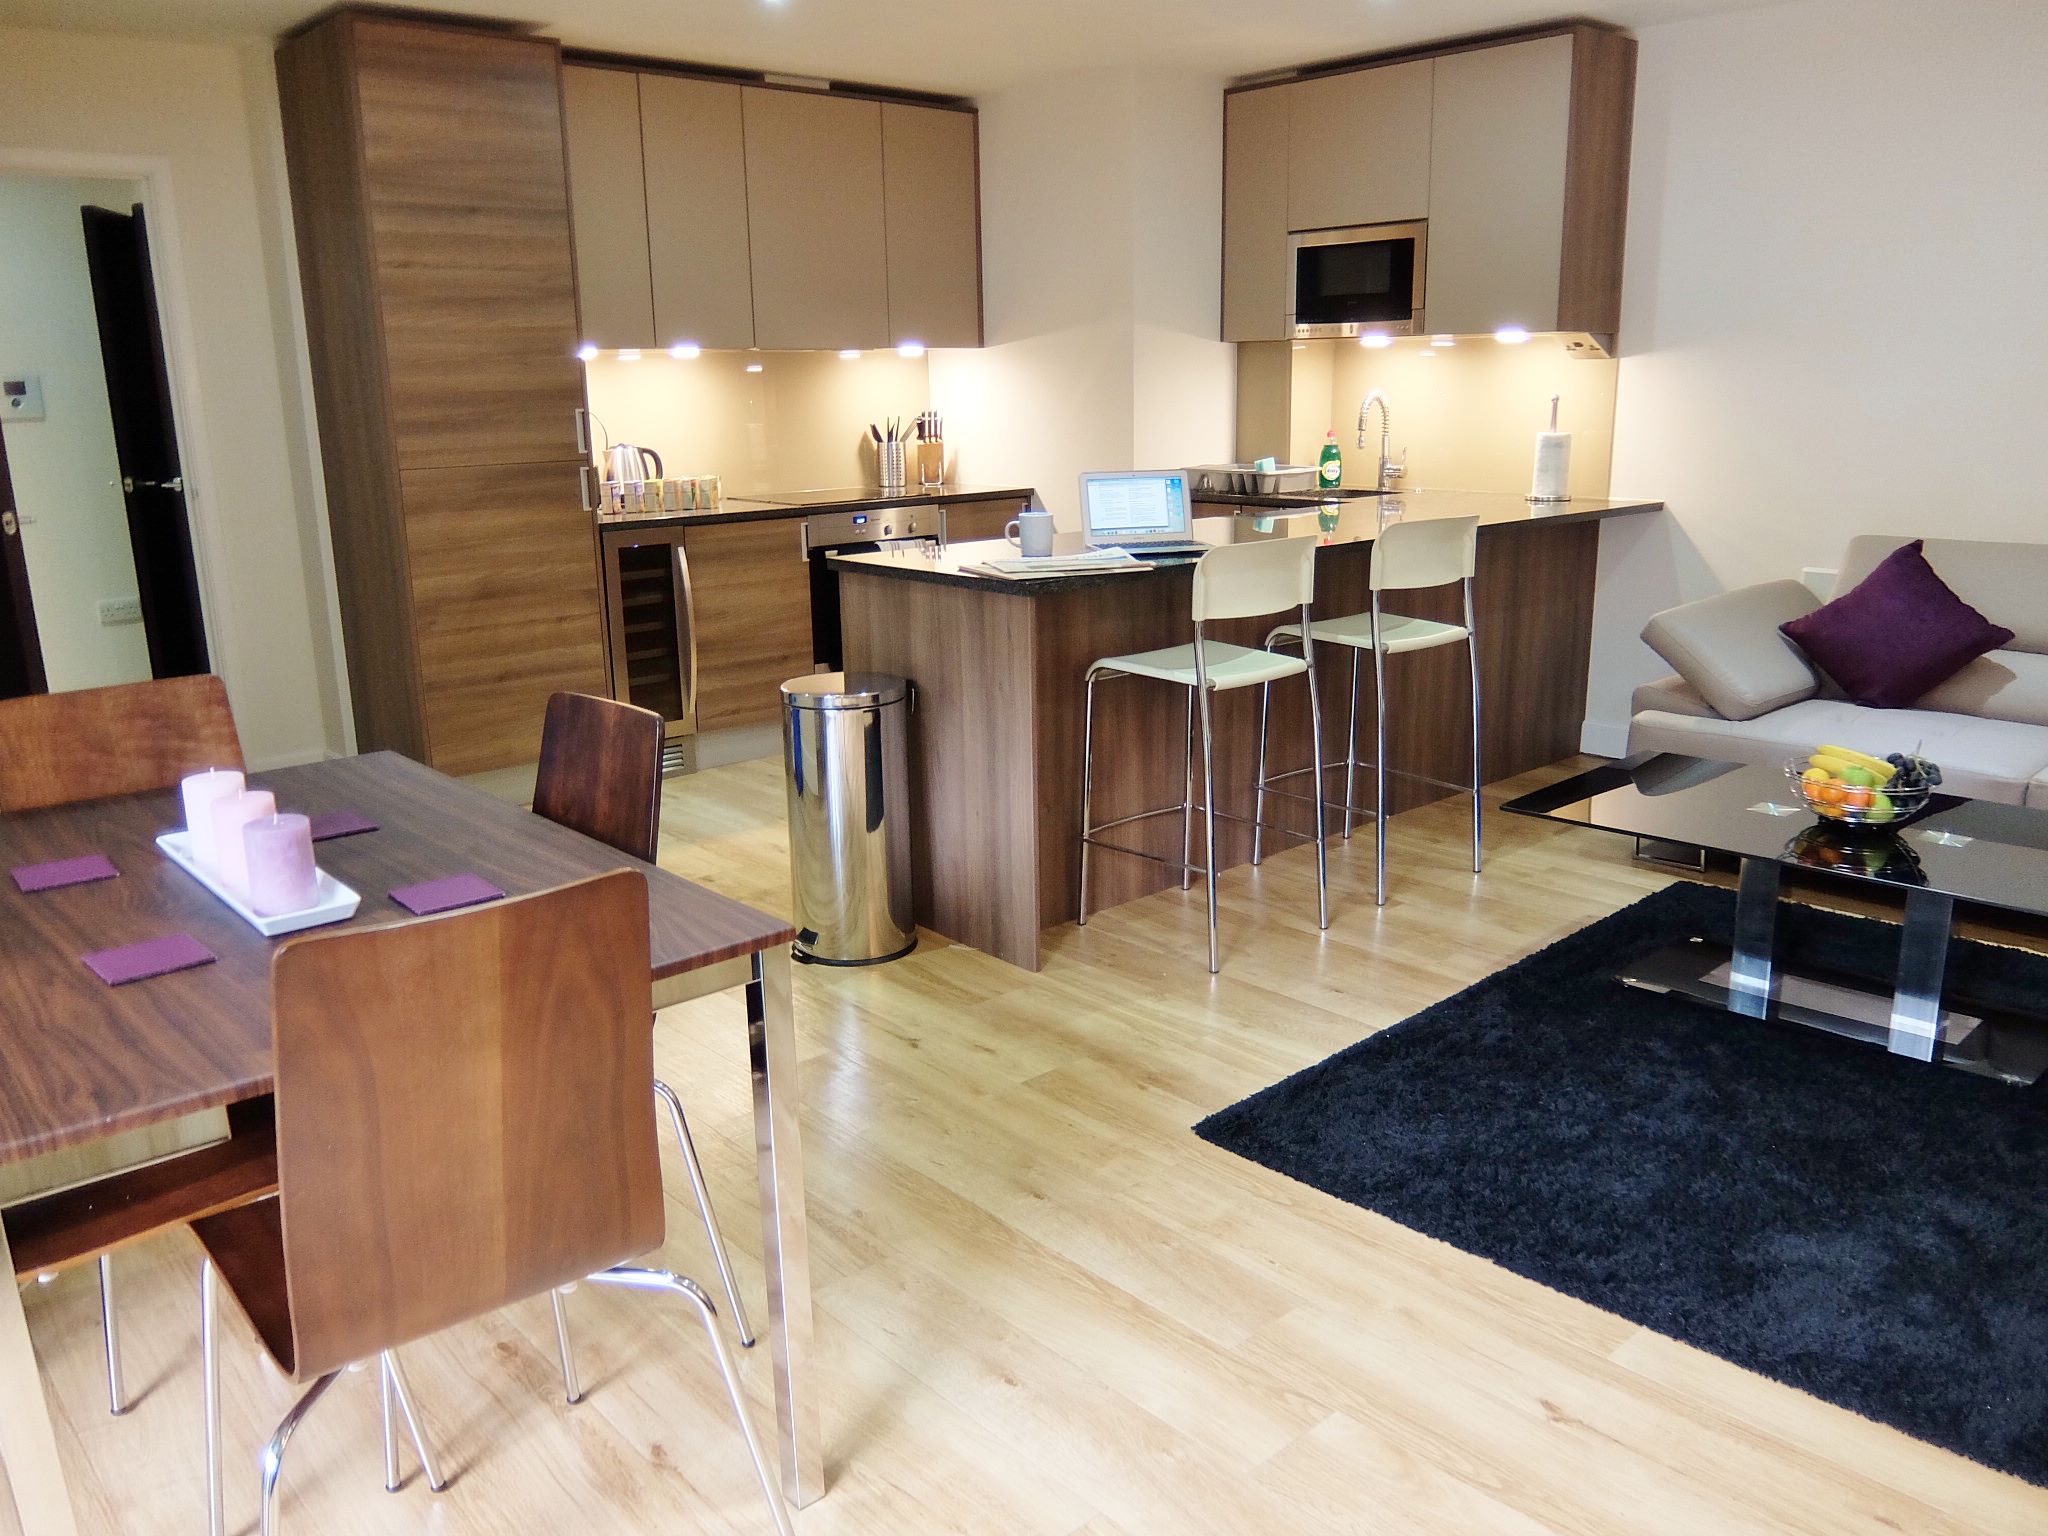 Book-Colindale-Serviced-Apartments-in-North-London-now.-This-self-catering-accommodation-with-balcony-has-Wifi,-a-smart-TV-and-full-kitchen.